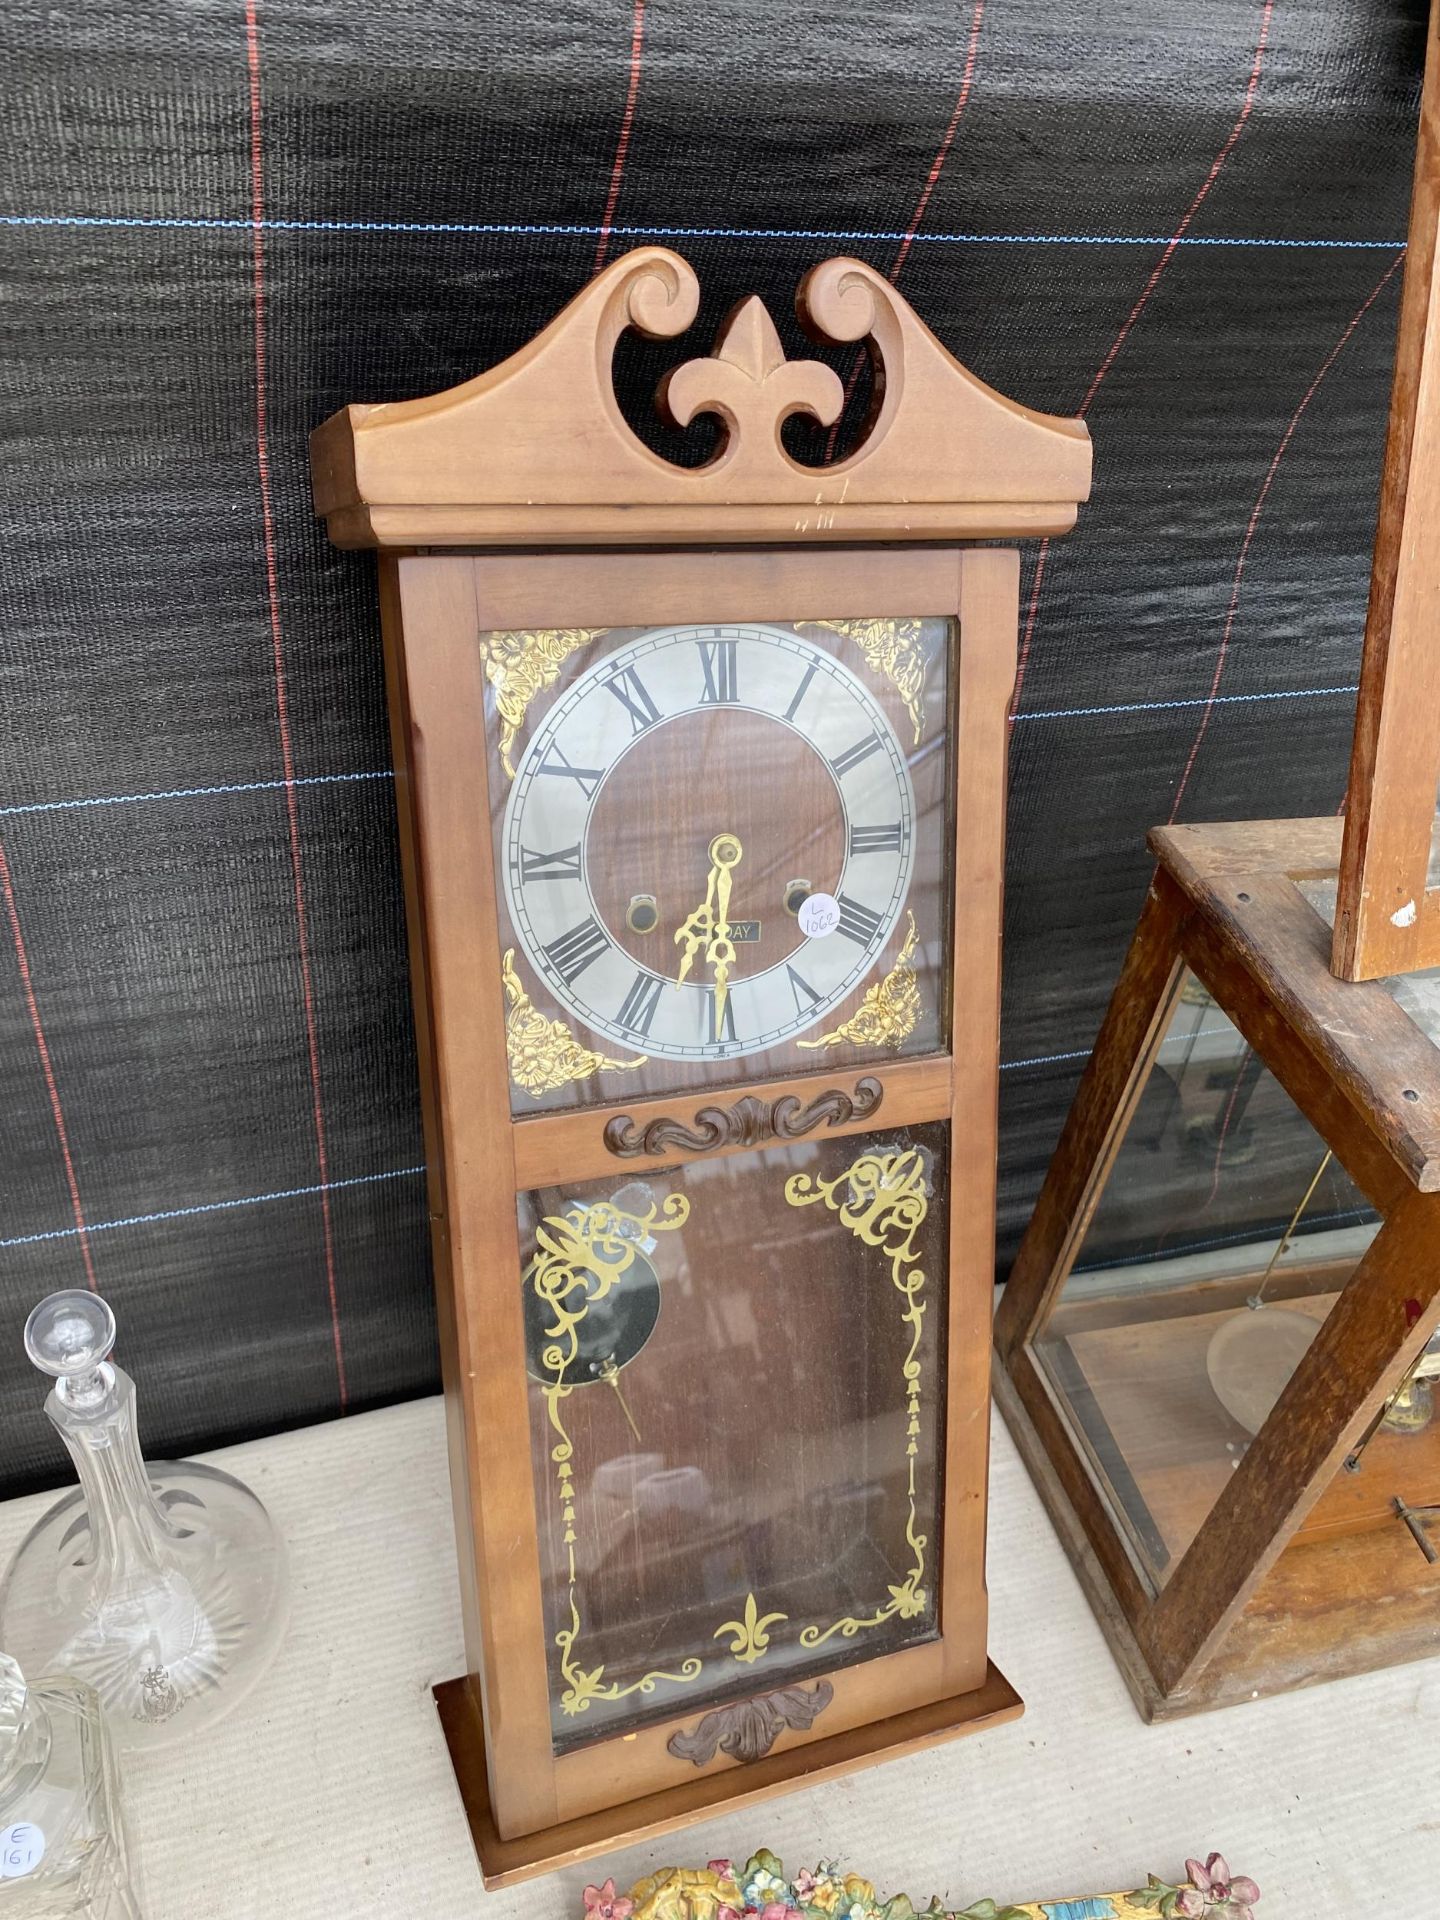 TWO ITEMS - A VINTAGE FLORAL BARBOLA MIRROR AND A MODERN 31 DAY CLOCK - Image 2 of 7